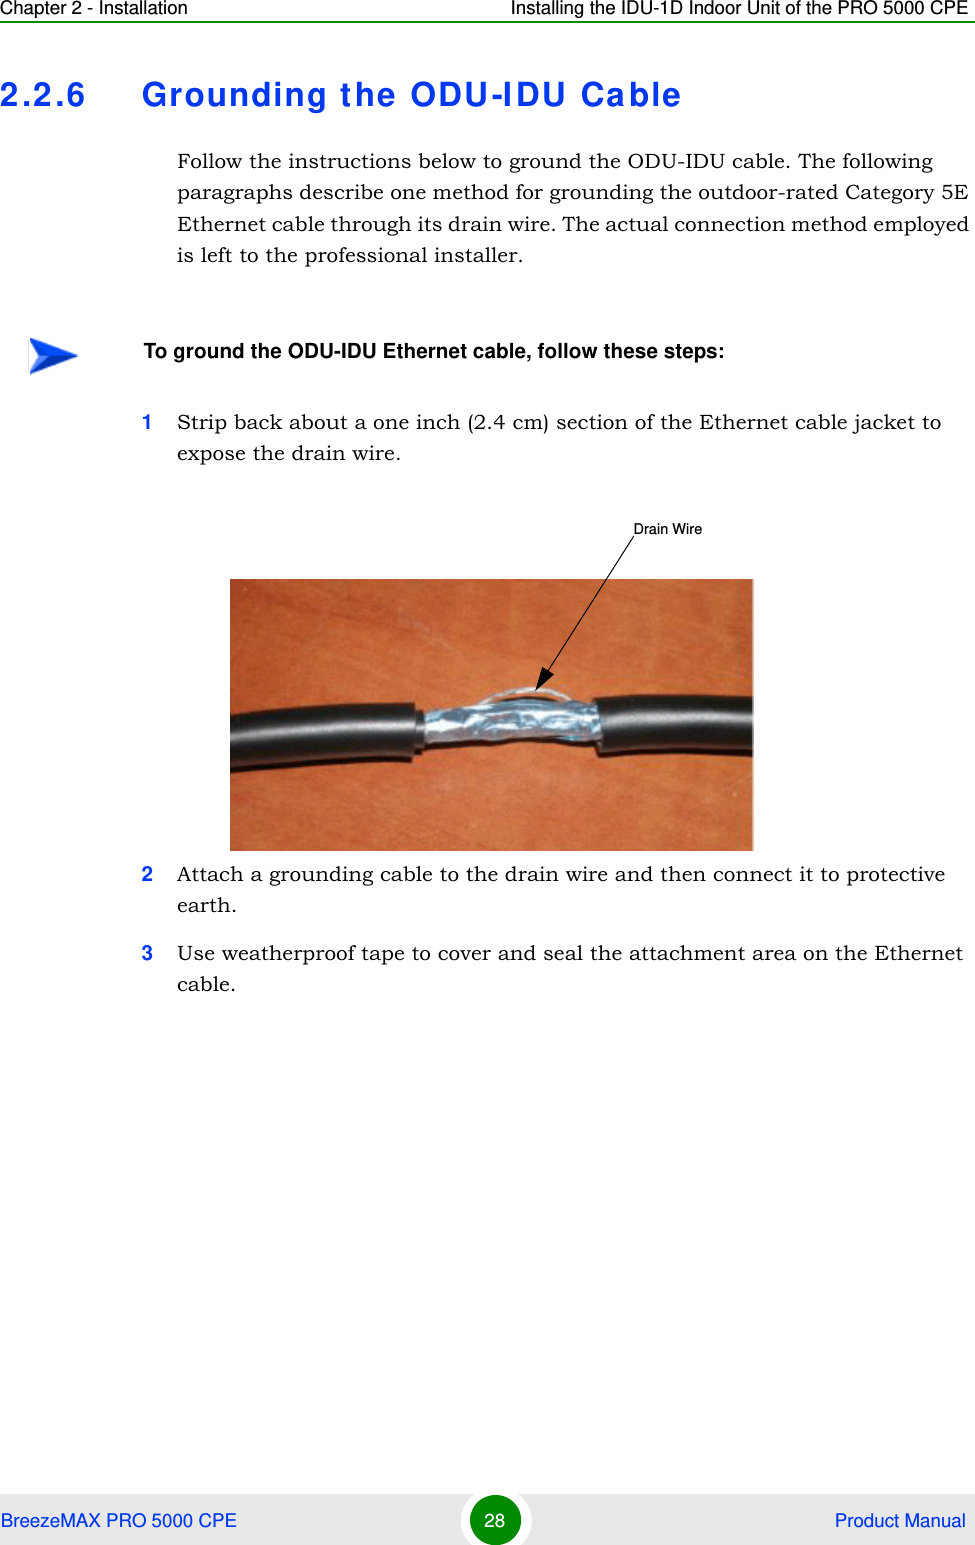 Chapter 2 - Installation Installing the IDU-1D Indoor Unit of the PRO 5000 CPEBreezeMAX PRO 5000 CPE 28  Product Manual2.2.6 Grounding the ODU-IDU CableFollow the instructions below to ground the ODU-IDU cable. The following paragraphs describe one method for grounding the outdoor-rated Category 5E Ethernet cable through its drain wire. The actual connection method employed is left to the professional installer.1Strip back about a one inch (2.4 cm) section of the Ethernet cable jacket to expose the drain wire.2Attach a grounding cable to the drain wire and then connect it to protective earth.3Use weatherproof tape to cover and seal the attachment area on the Ethernet cable.To ground the ODU-IDU Ethernet cable, follow these steps:Drain Wire